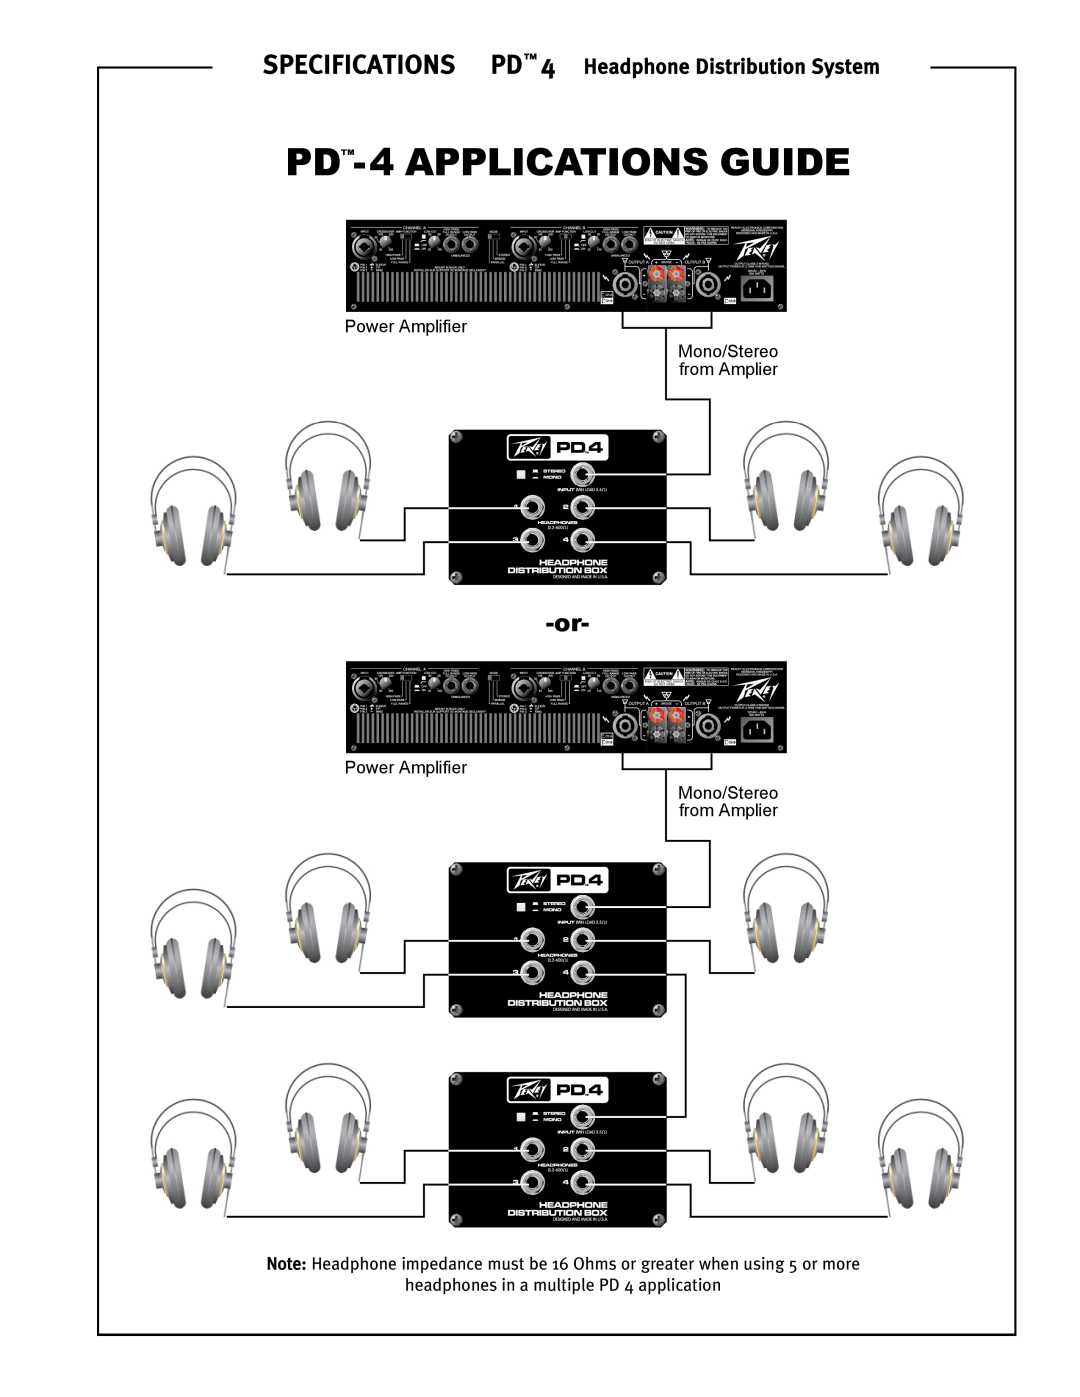 Peavey specifications Headphone Distribution System, PD -4 APPLICATIONS GUIDE, Specifications 